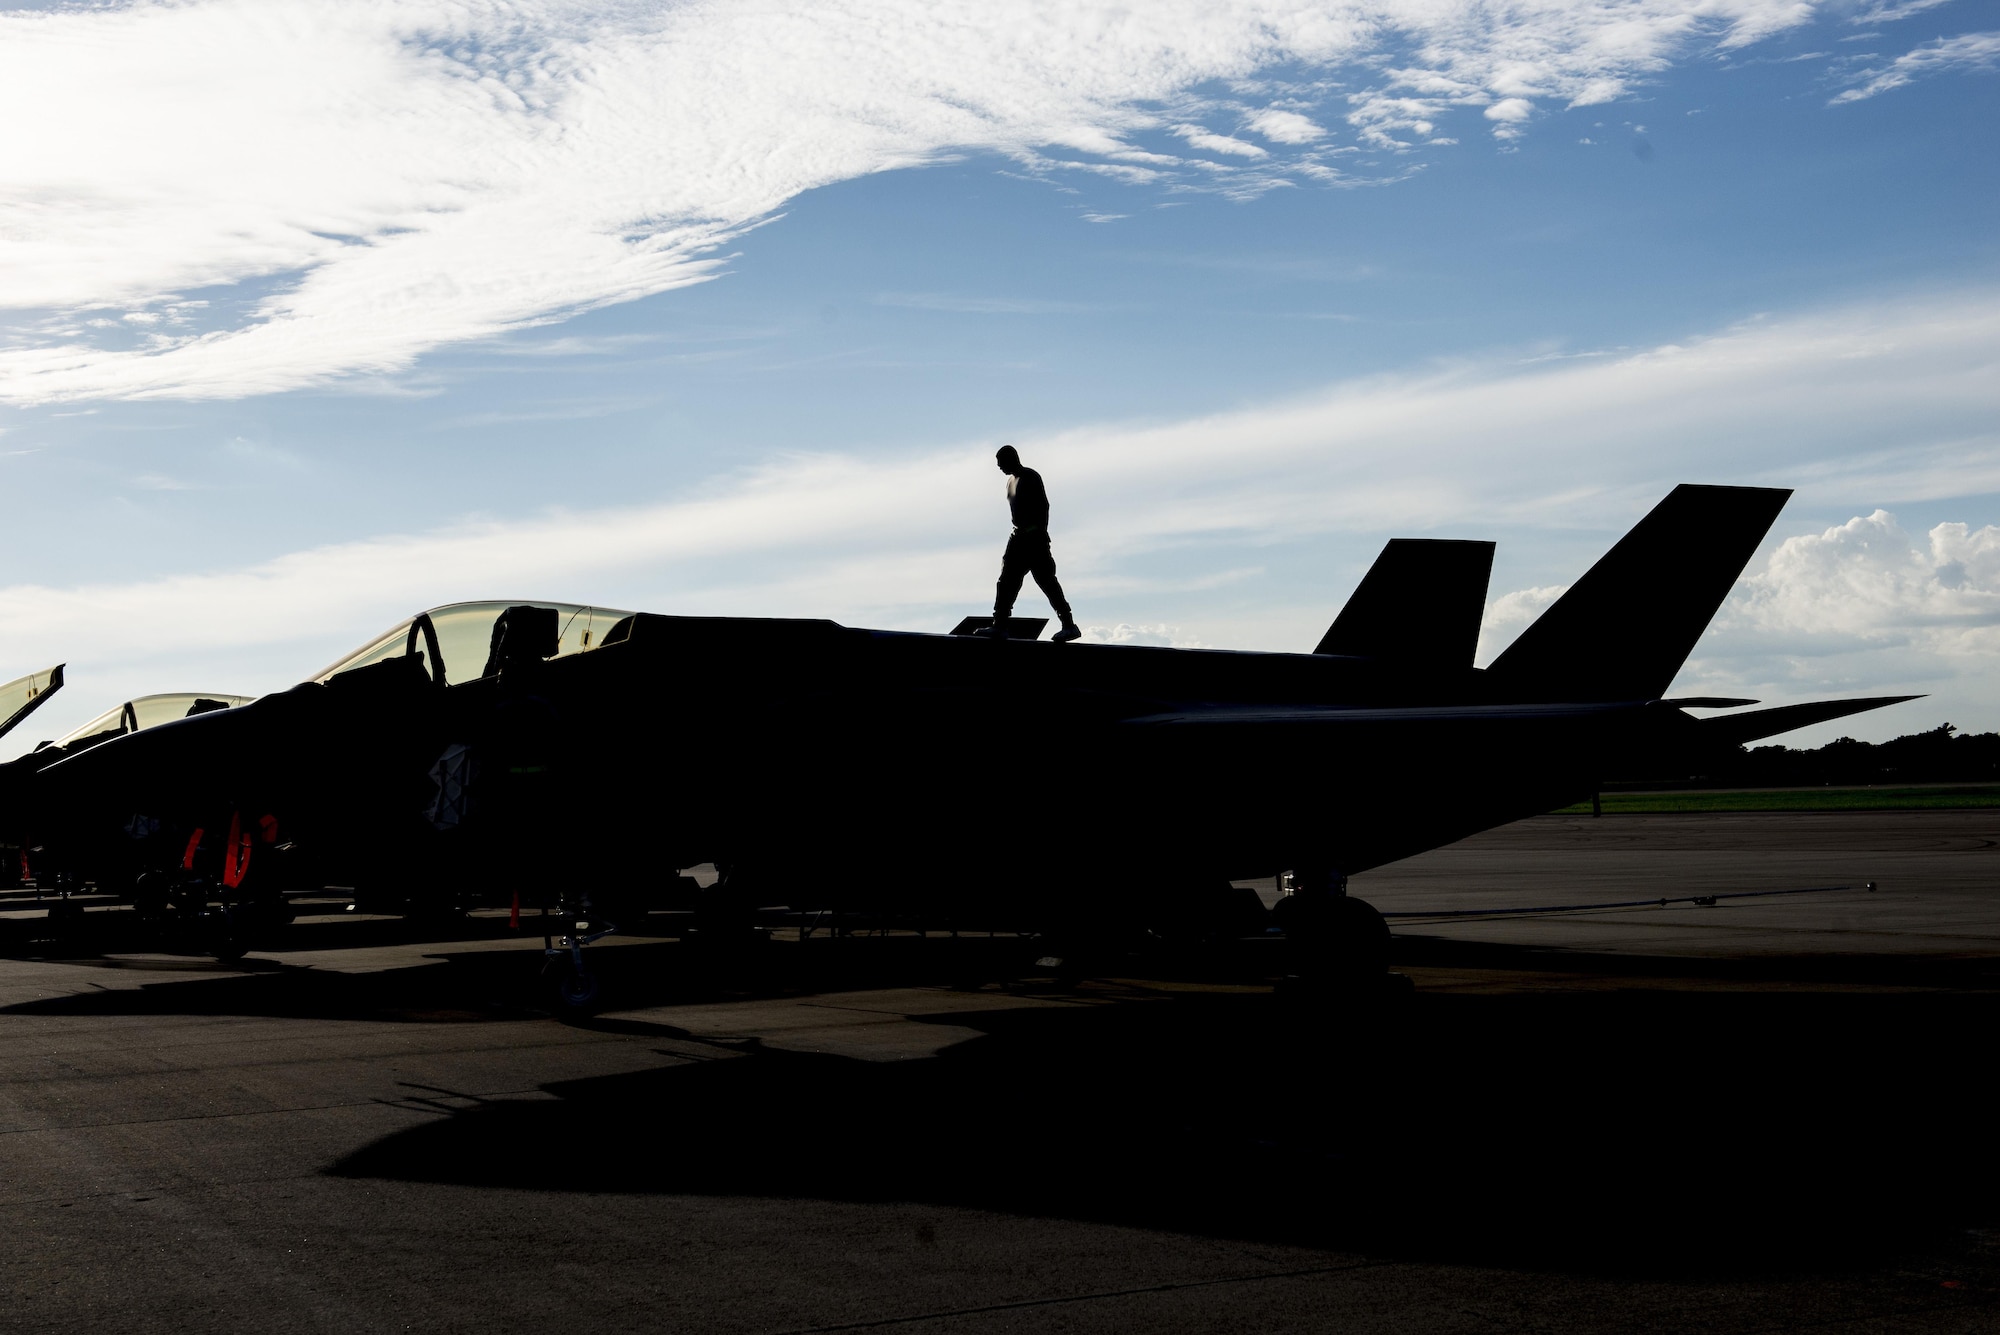 A 33rd Aircraft Maintenance Squadron Airman performs a maintenance inspection on an F-35A during Exercise Northern Lightning Aug. 30, 2016, at Volk Field, Wis. Northern Lightning is a joint total force exercise between the Air National Guard, Air Force and Navy conducting offensive counter air, suppression and destruction of enemy air defense and close air support. (U.S. Air Force photo by Senior Airman Stormy Archer)